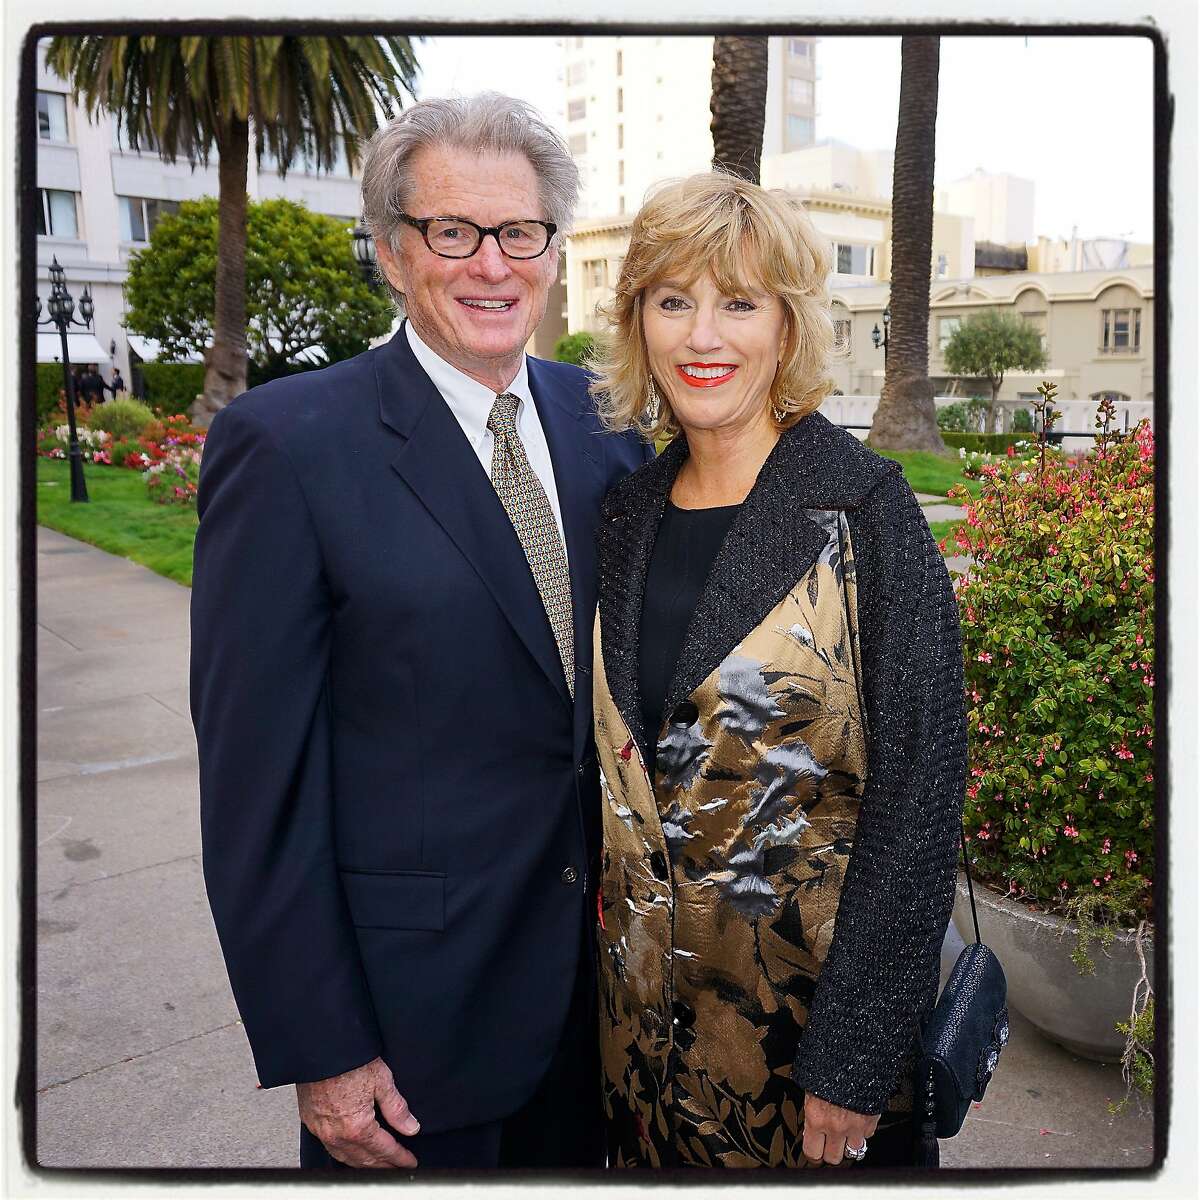 Kevin Shanahan and his wife, SFGH Board President Connie Shanahan, at the Fairmont Hotel for the Tony Bennett benefit concert that raised $1 million for hospital pediatric care. August 2016.